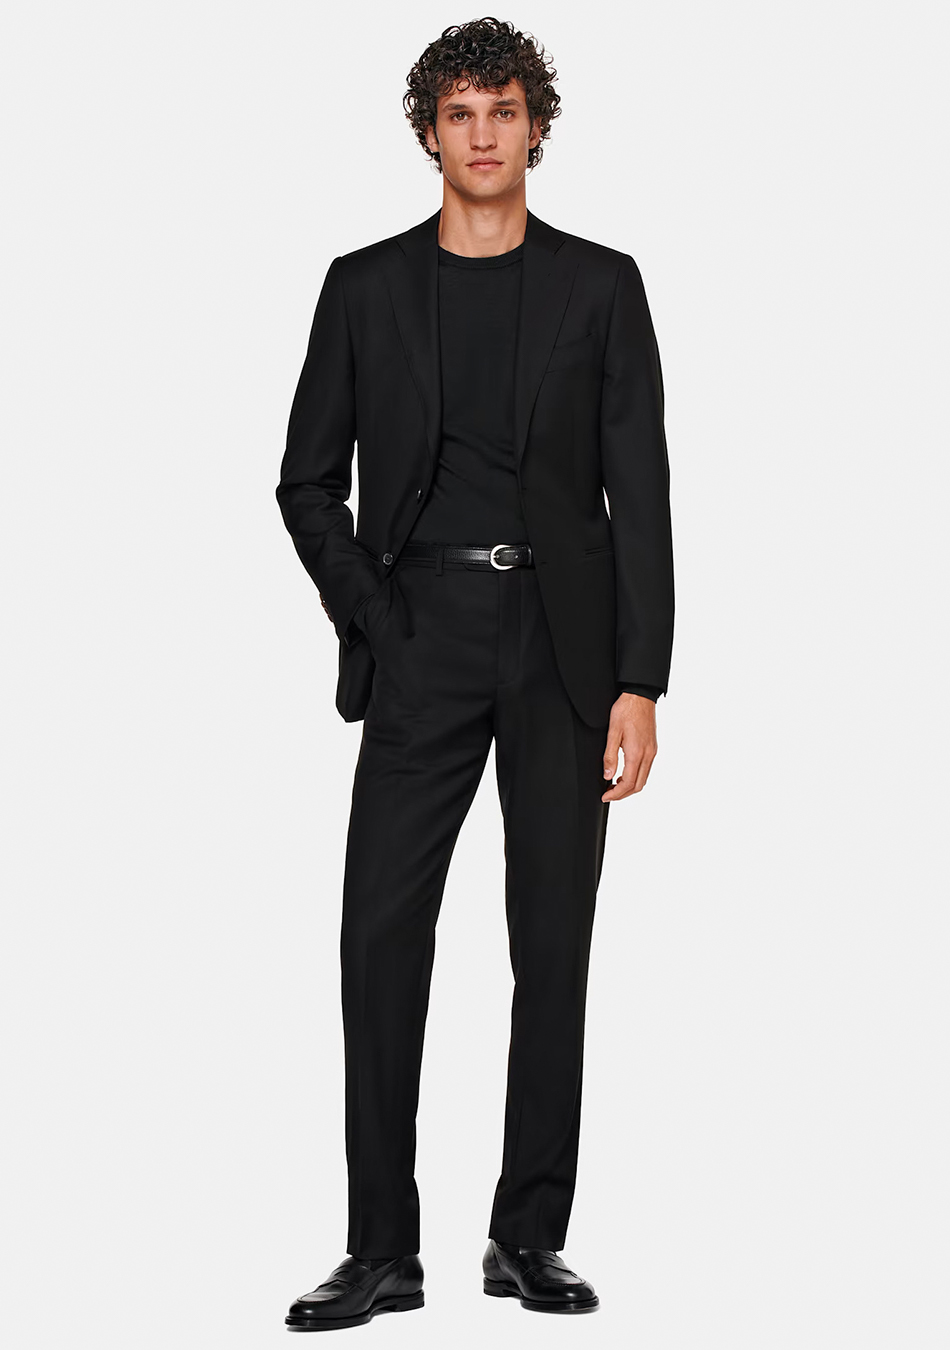 What type of (no button) shirt do people wear under their suit jacket? Is  really just a standard black tee? : r/SuitsShow